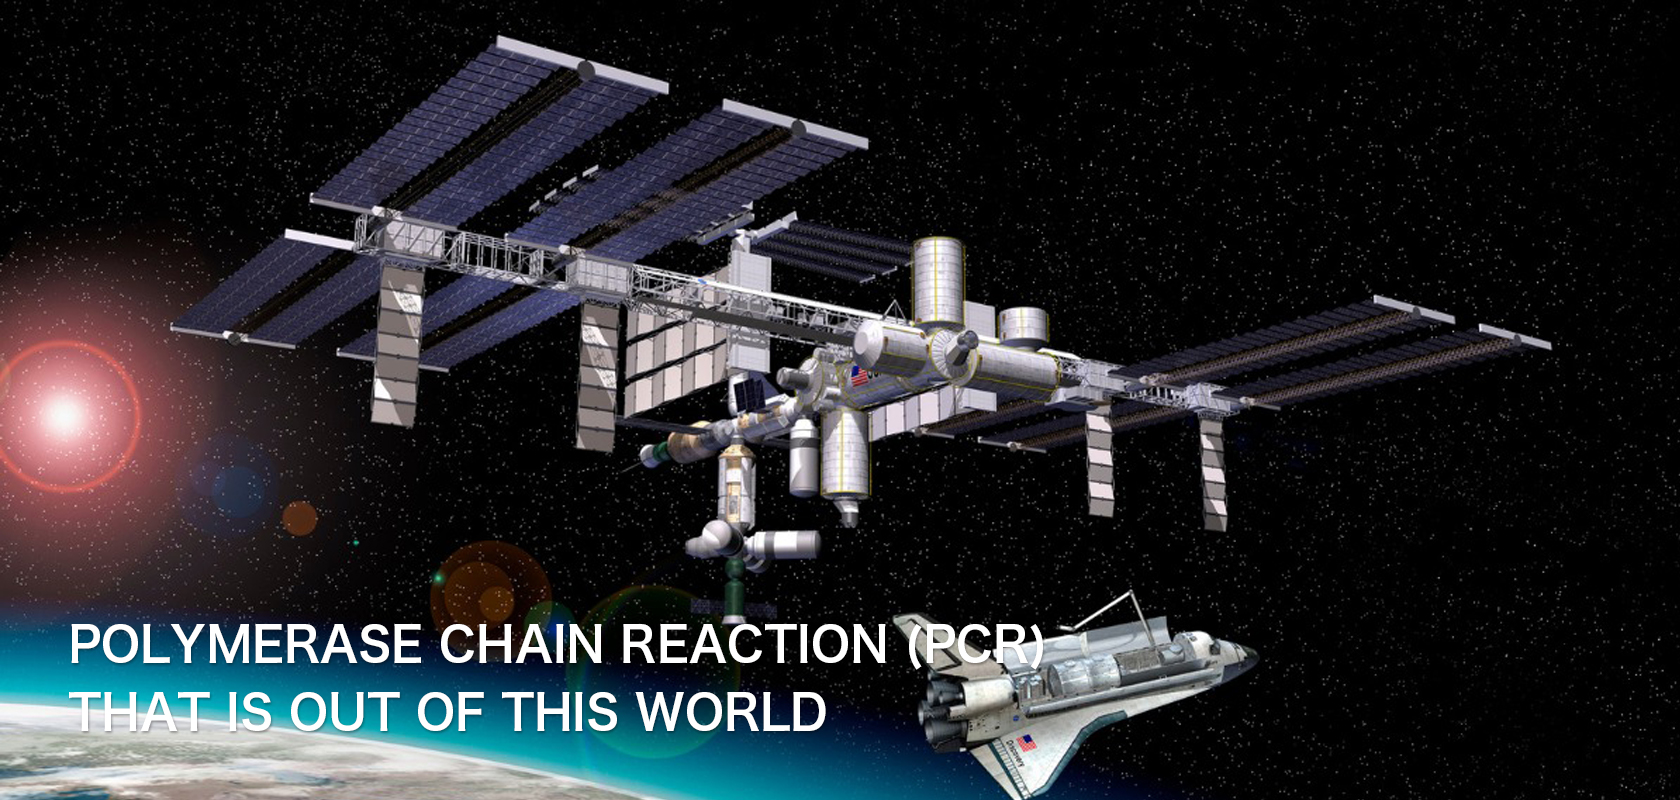 POLYMERASE CHAIN REACTION (PCR) THAT IS OUT OF THIS WORLD